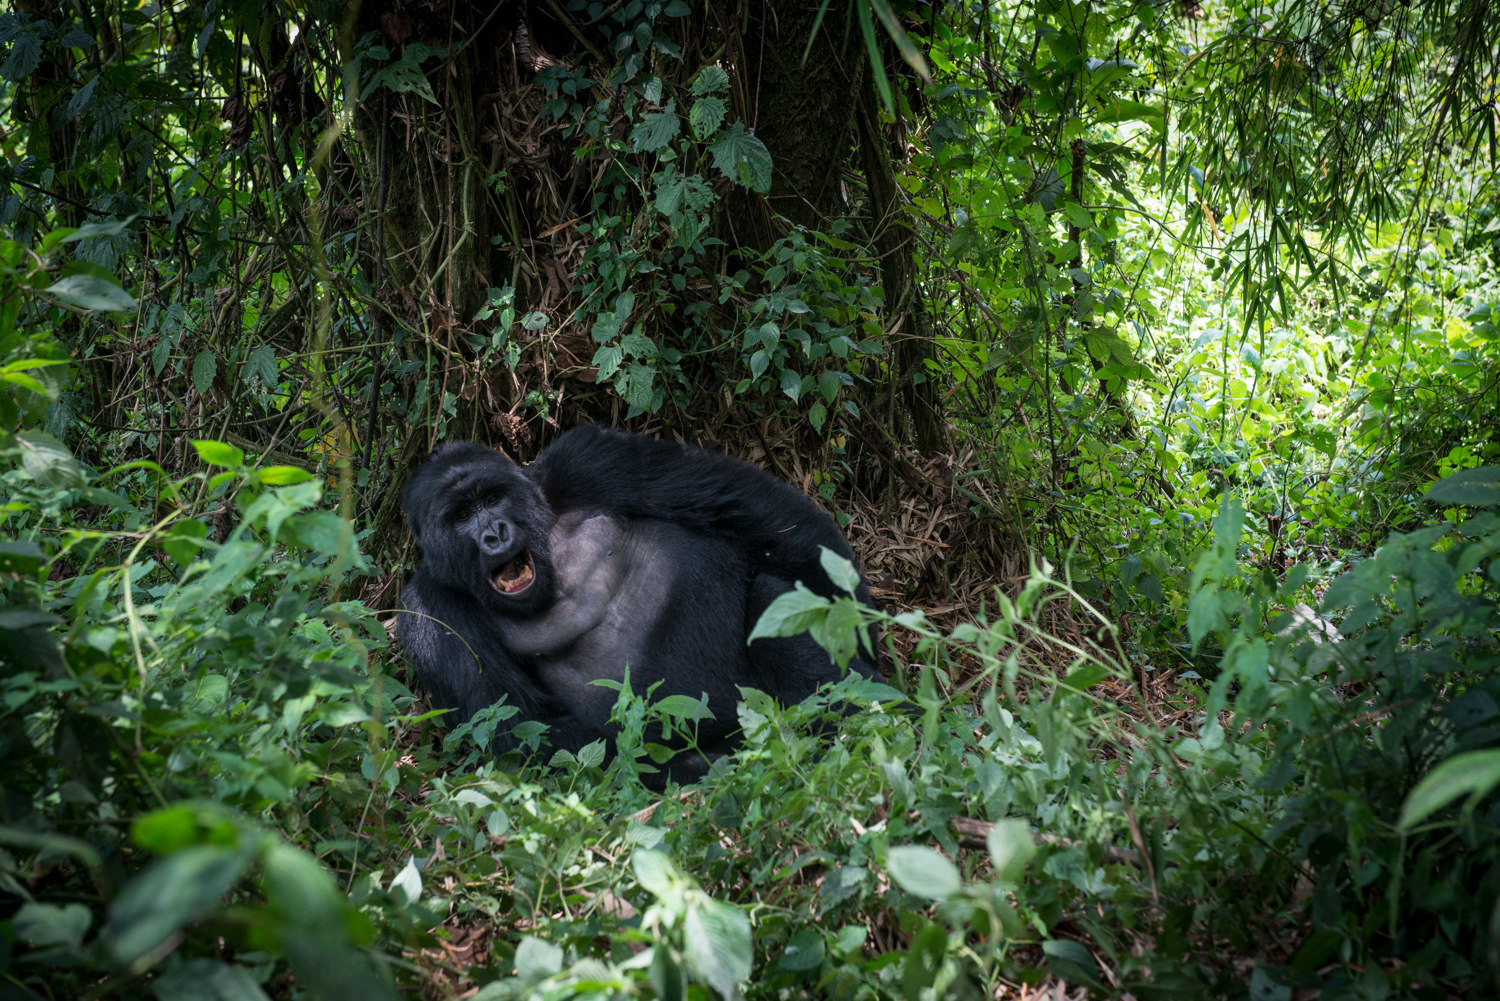  A silverback gorilla lounges below a tree in Virunga's National Park.
 